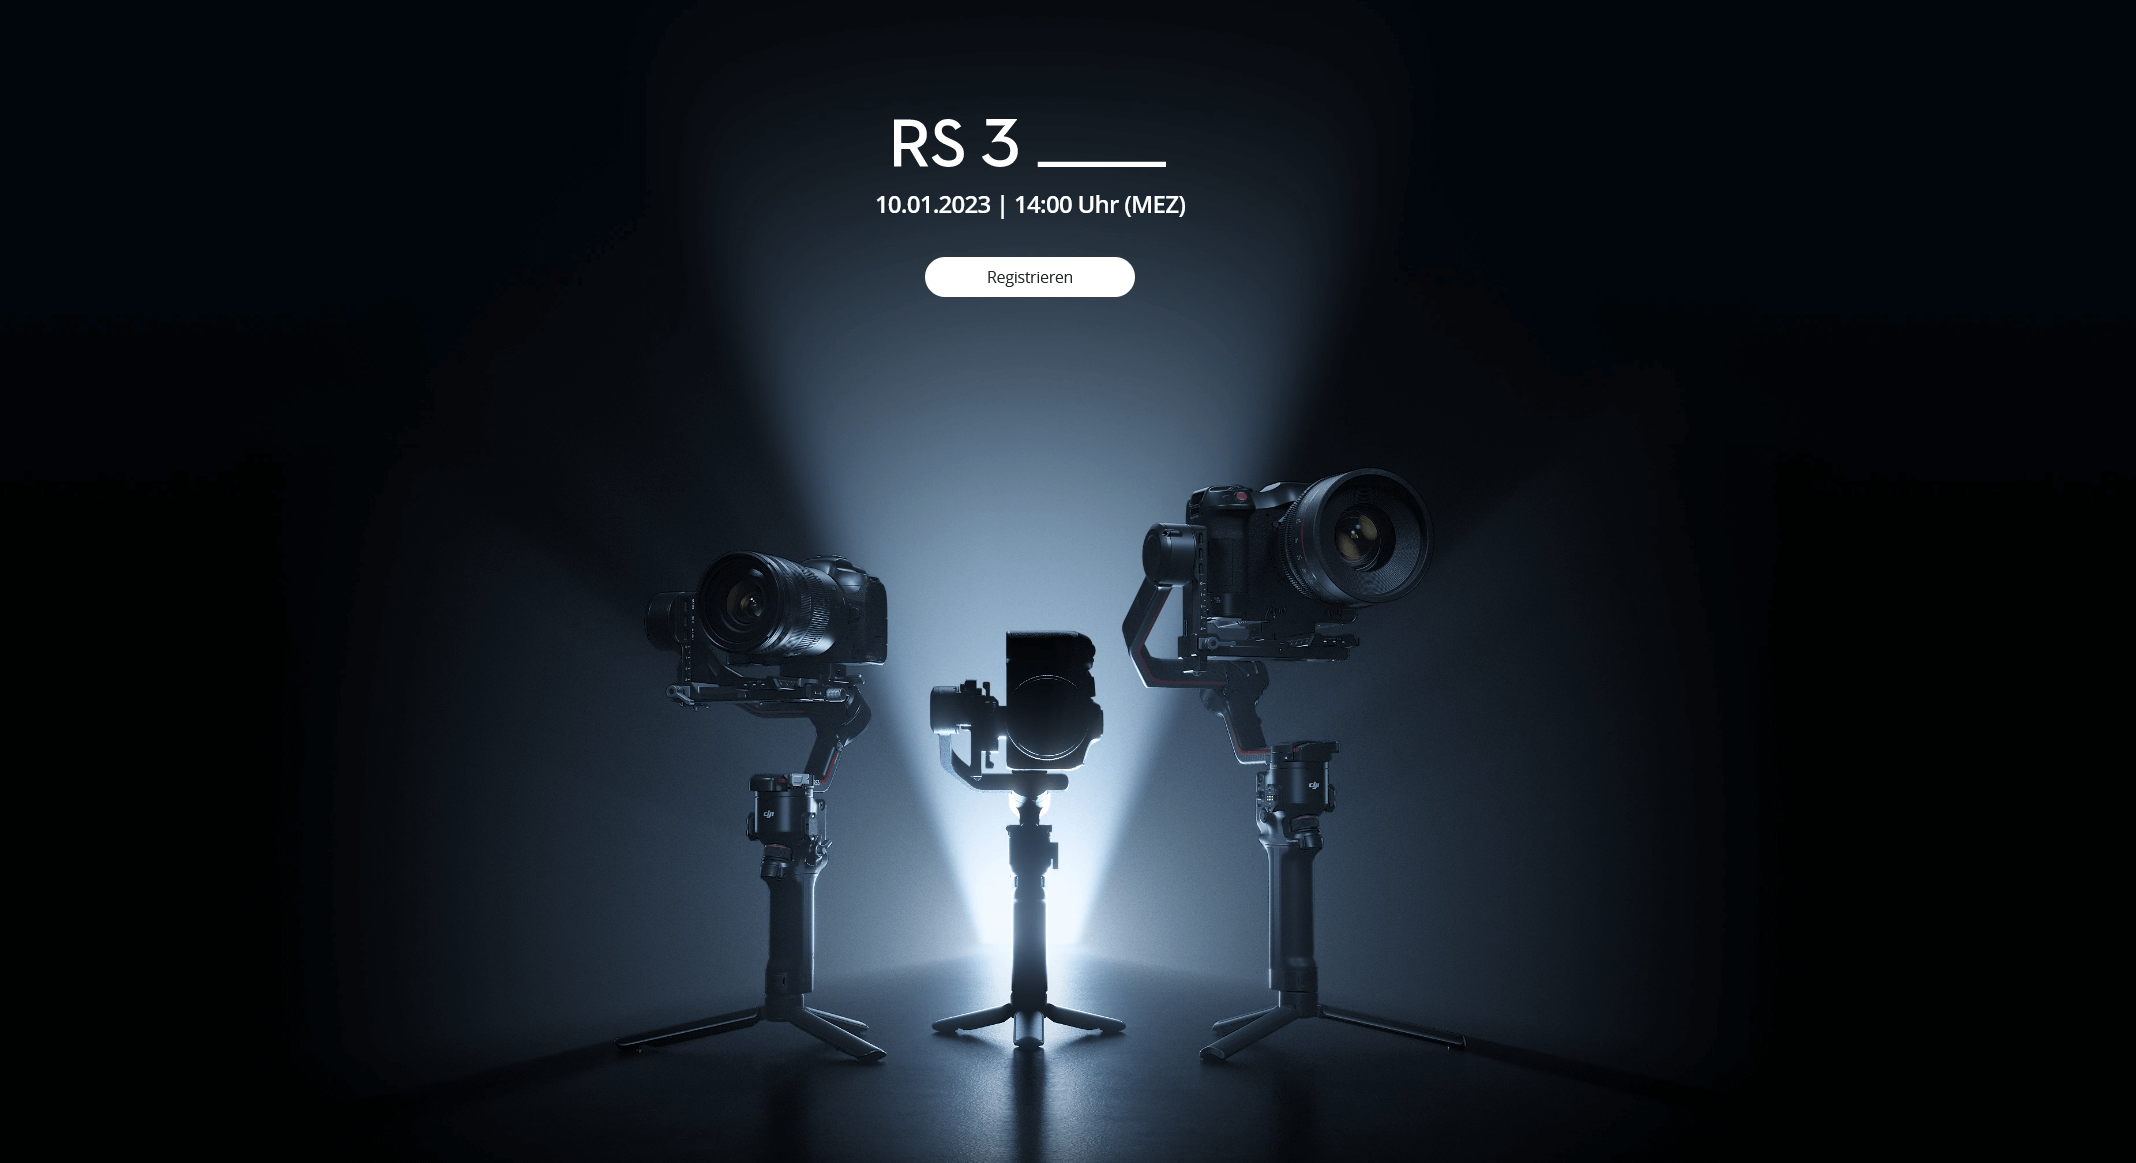 dji rs 3 pro product launch teaser